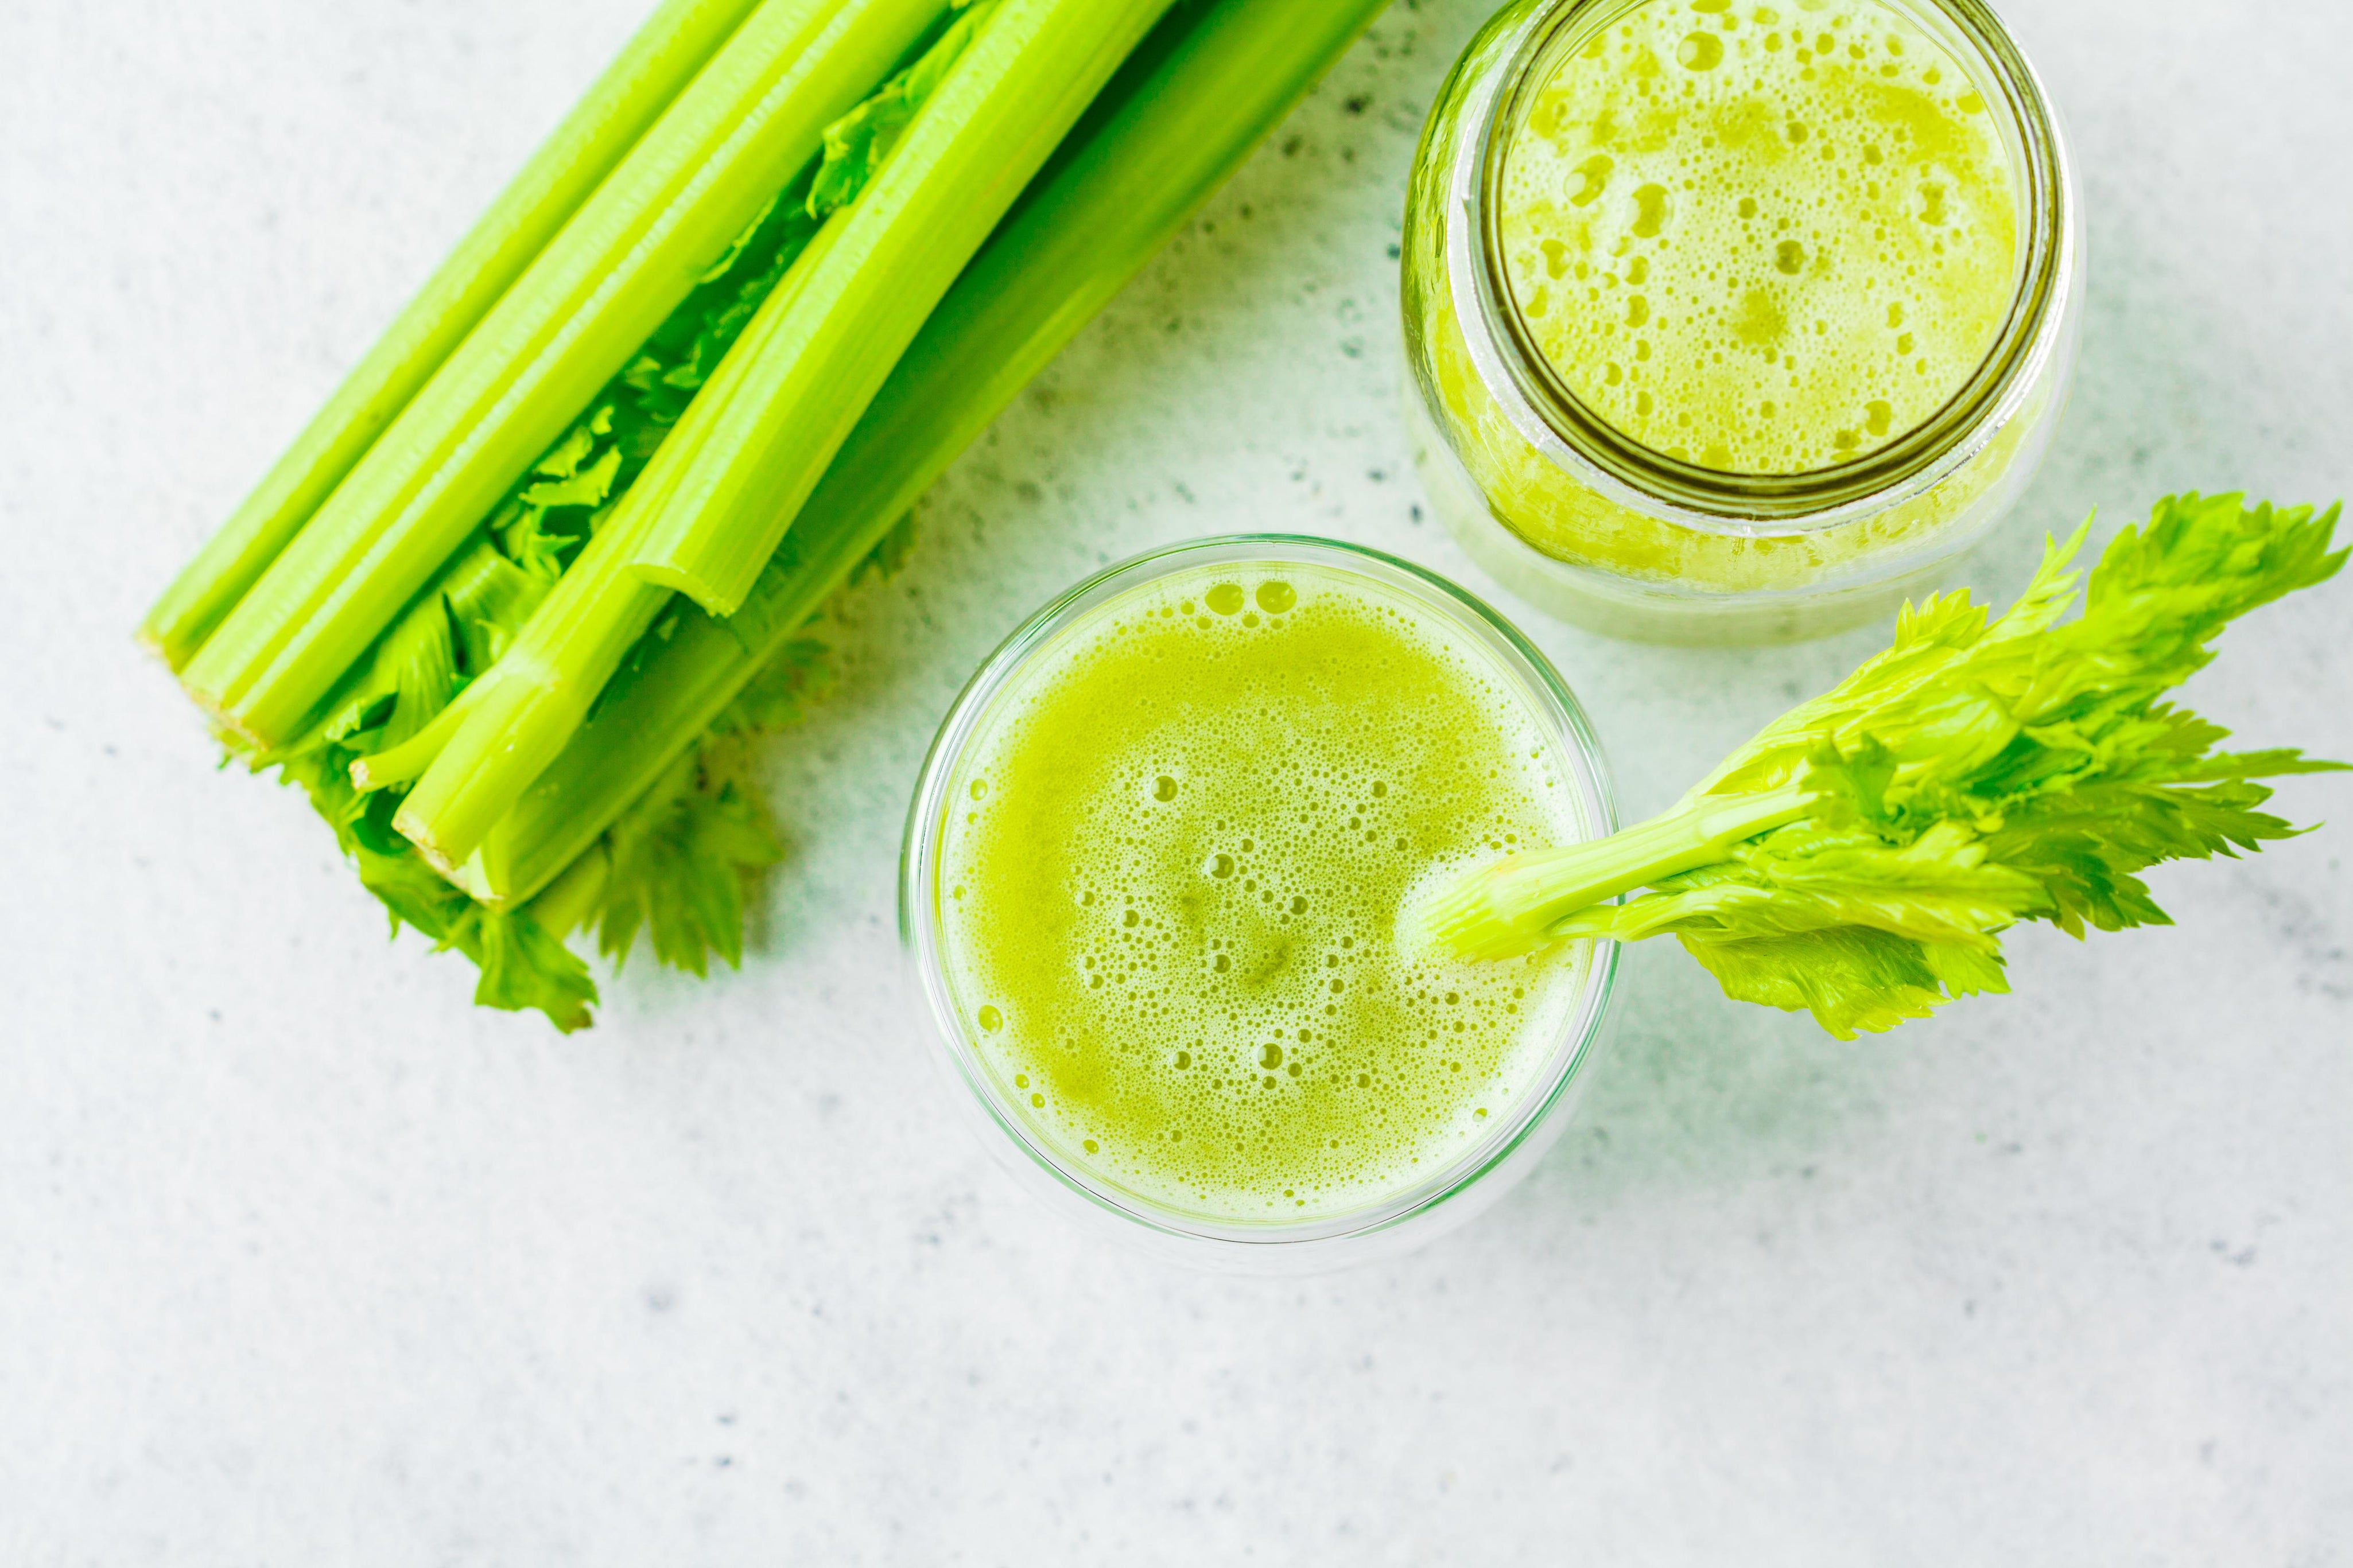 Celery Juice Benefits: What You Should Know - NatraCure